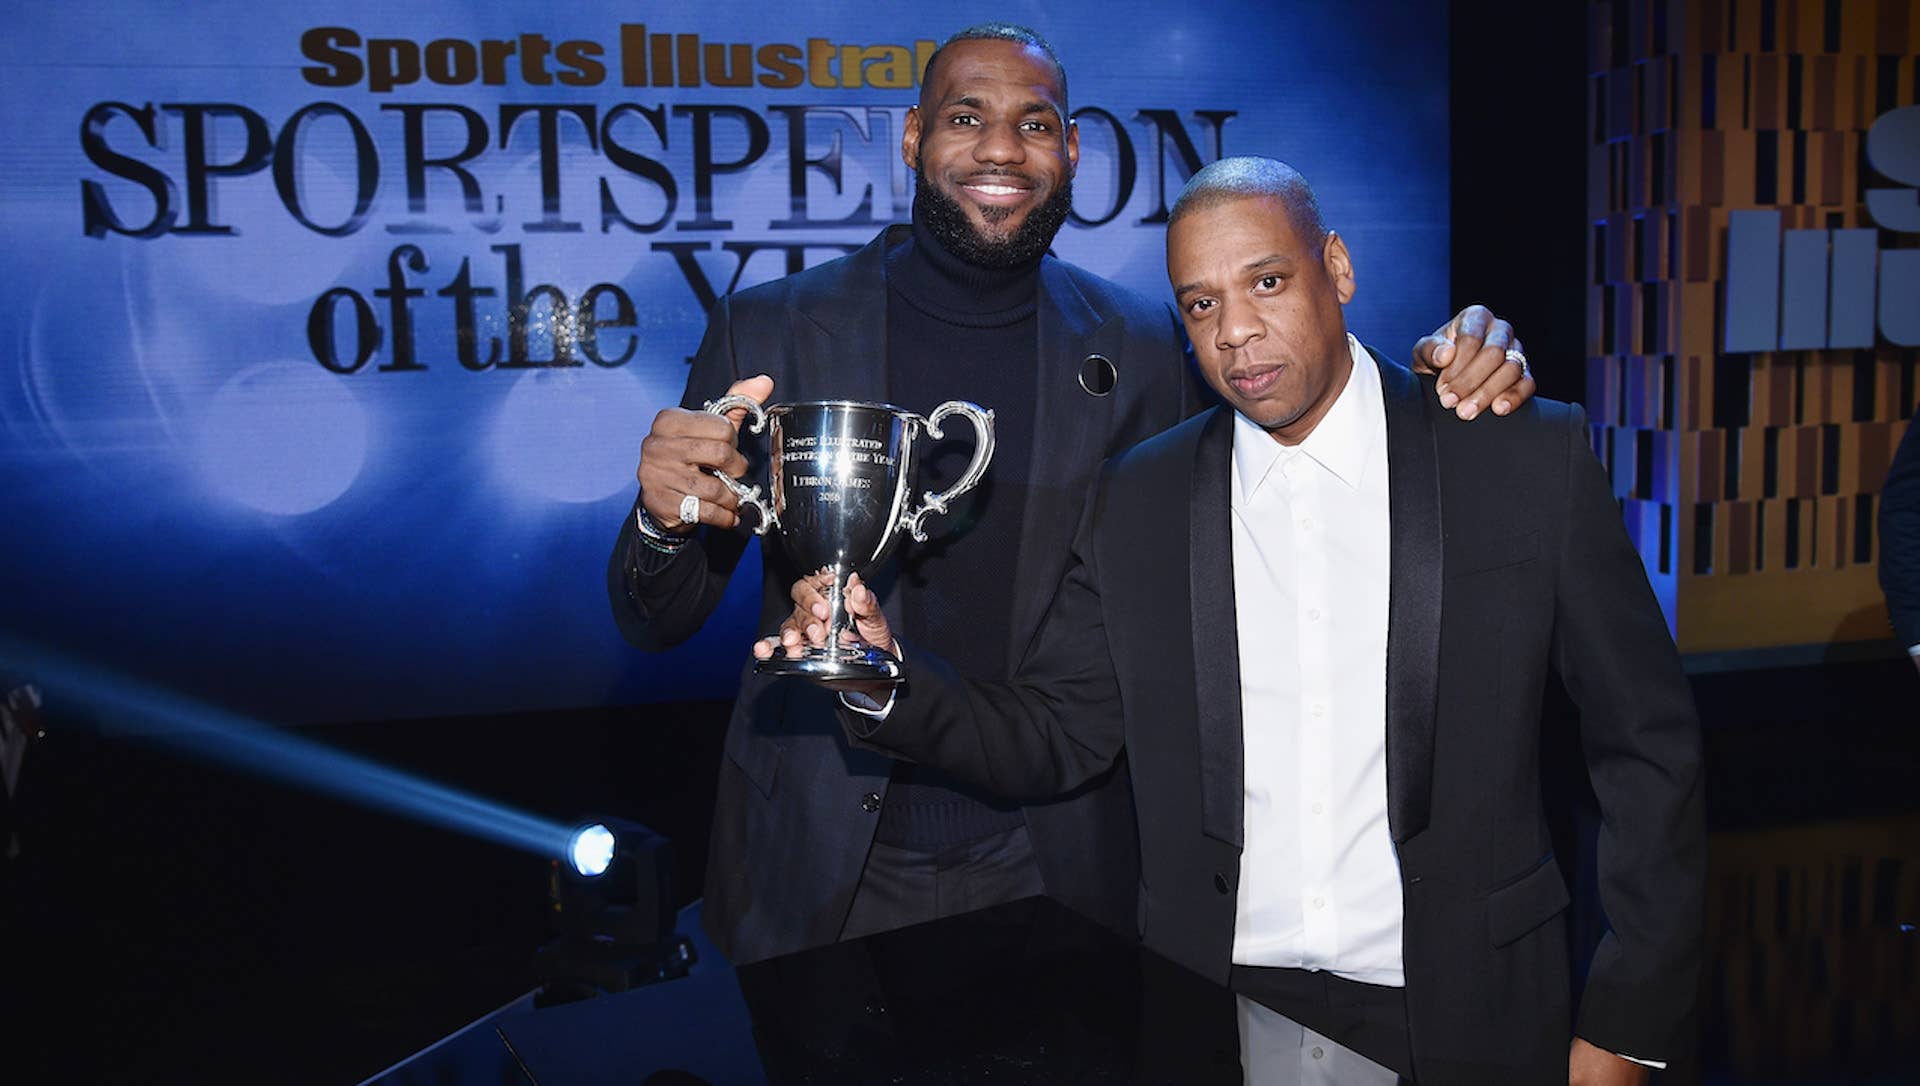 LeBron James and Jay Z pose onstage with an award during the Sports Illustrated Sportsperson of the Year Ceremony 2016 at Barclays Center of Brooklyn